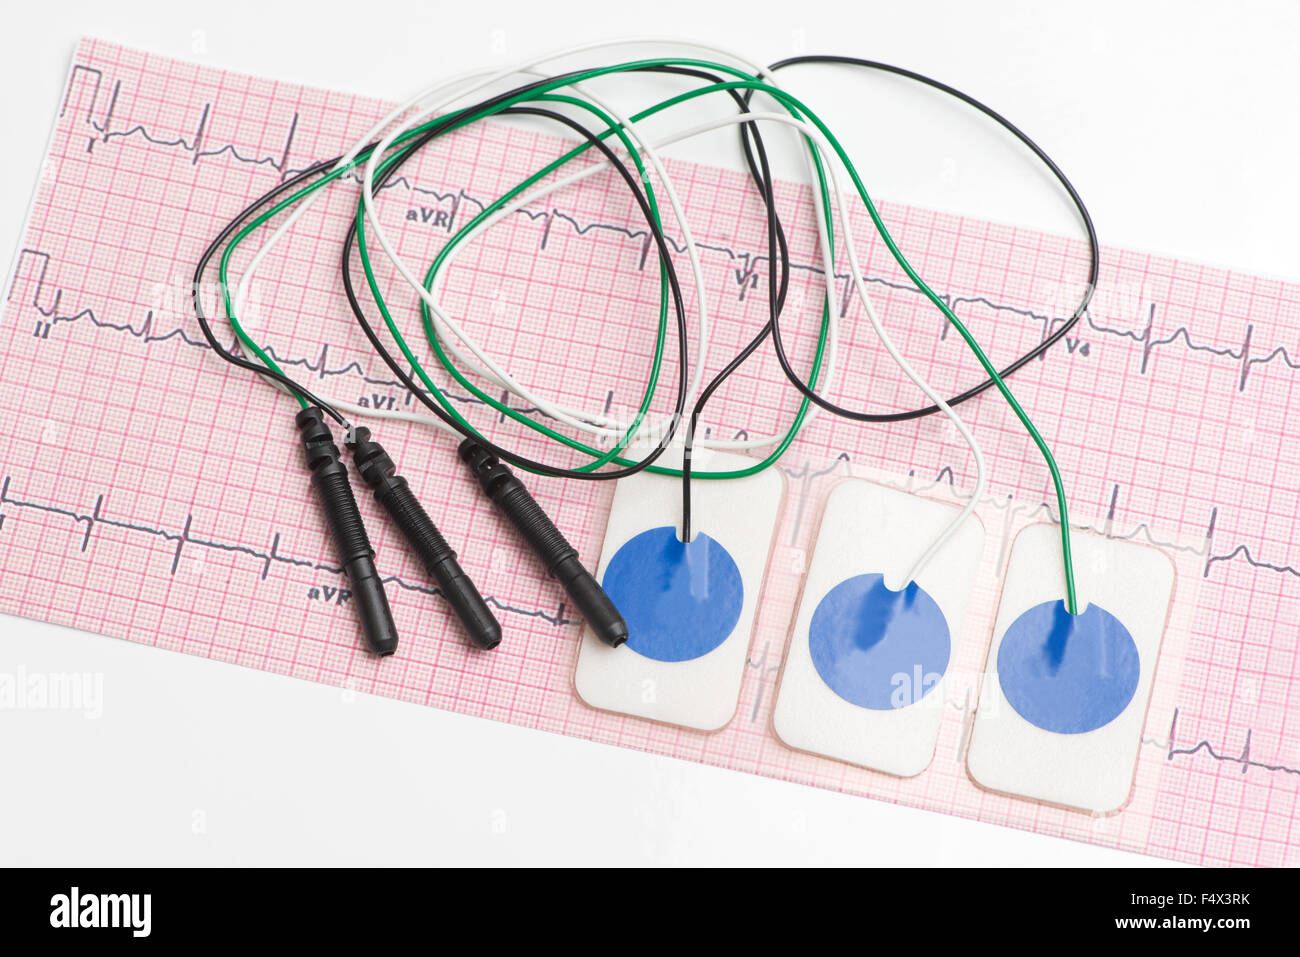 Electrocardiogram leads and electrocardiograph on white tabletop. Stock Photo